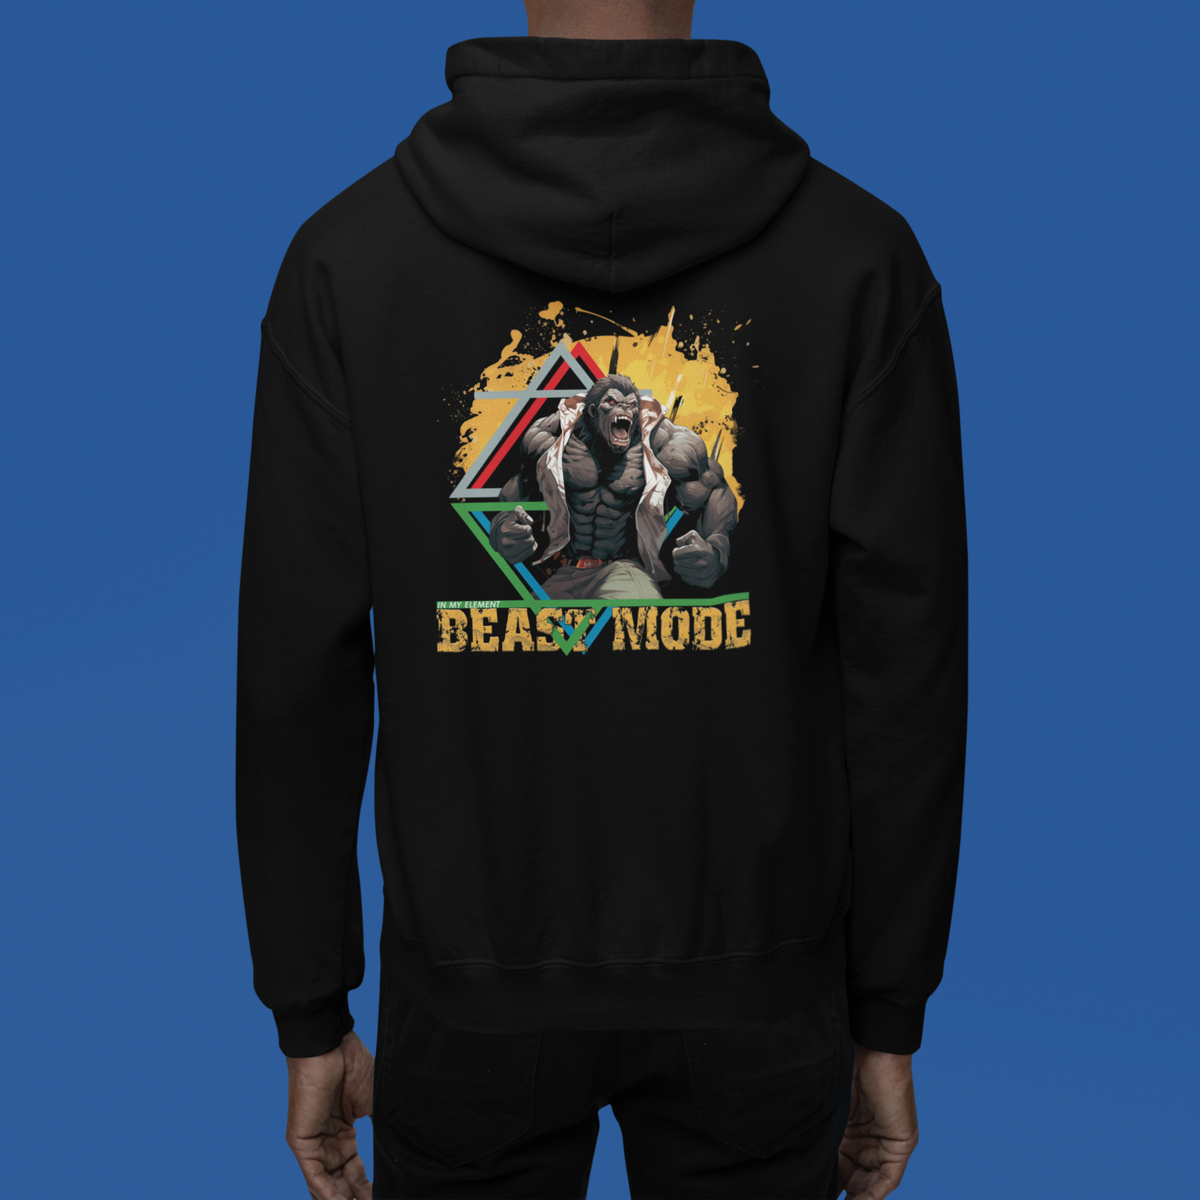 Beast Mode Unisex relaxed fit hoodie